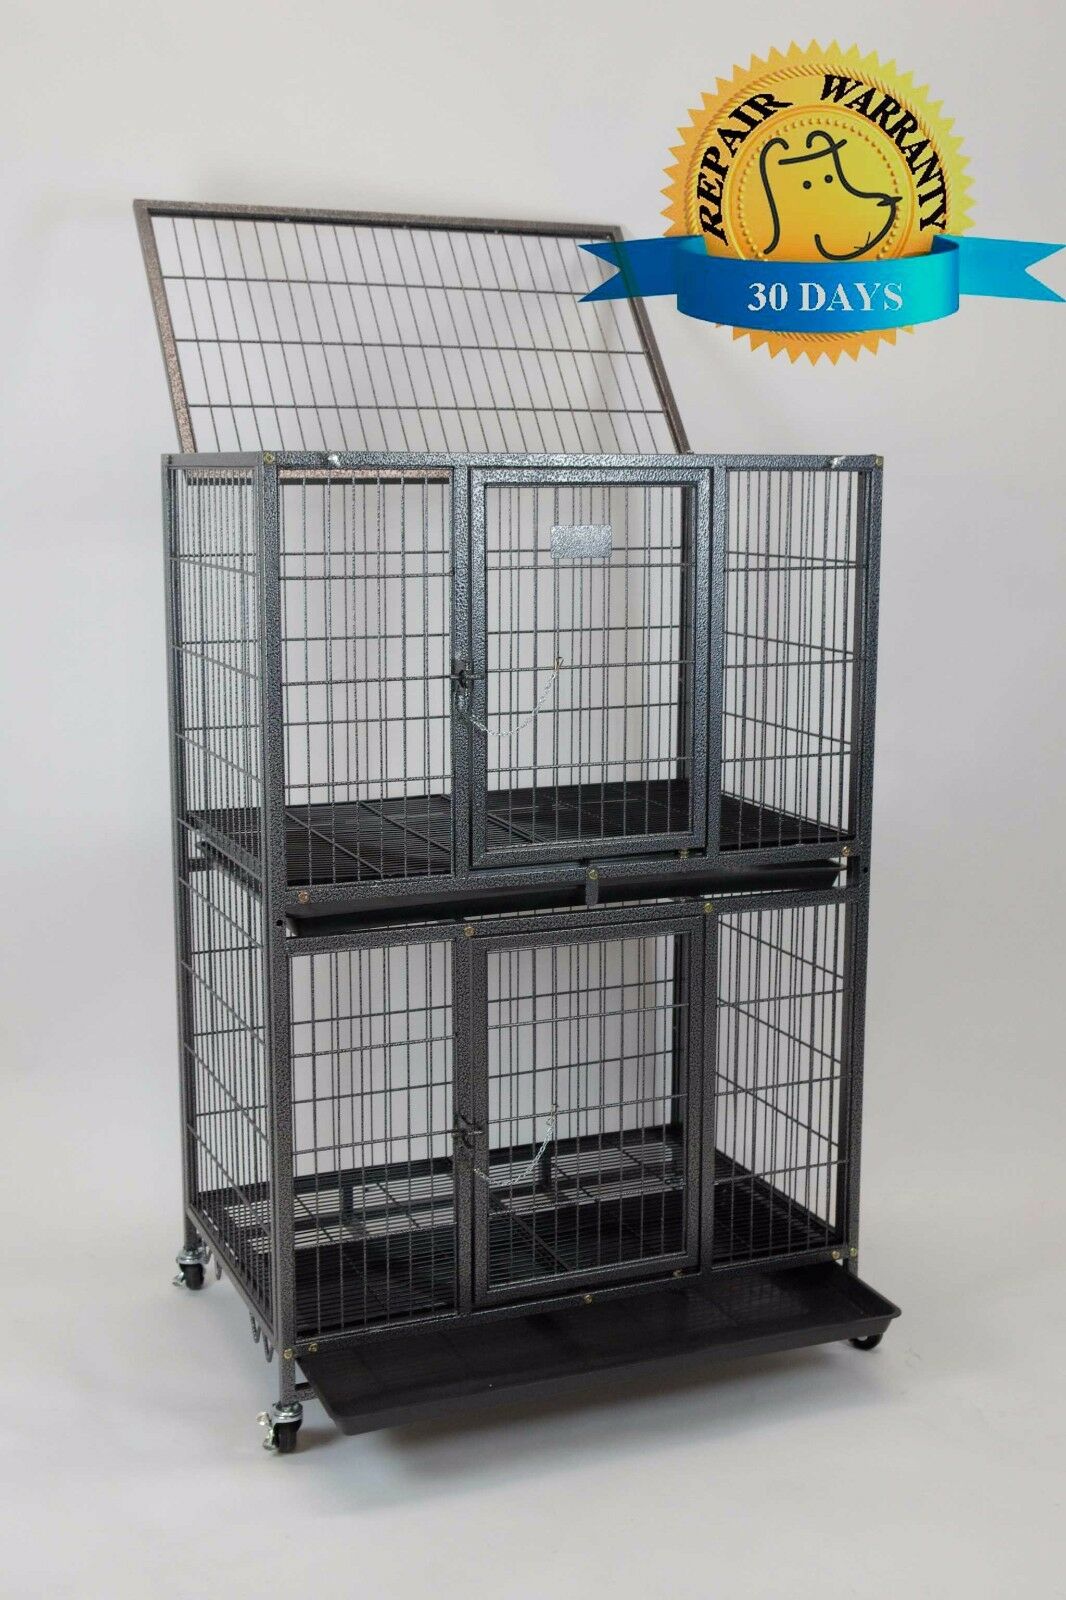 New 31" Homey Pet 2 Tiers Heavy Duty Dog Pet Rabbit Cat Cage Crate Kennel W Tray